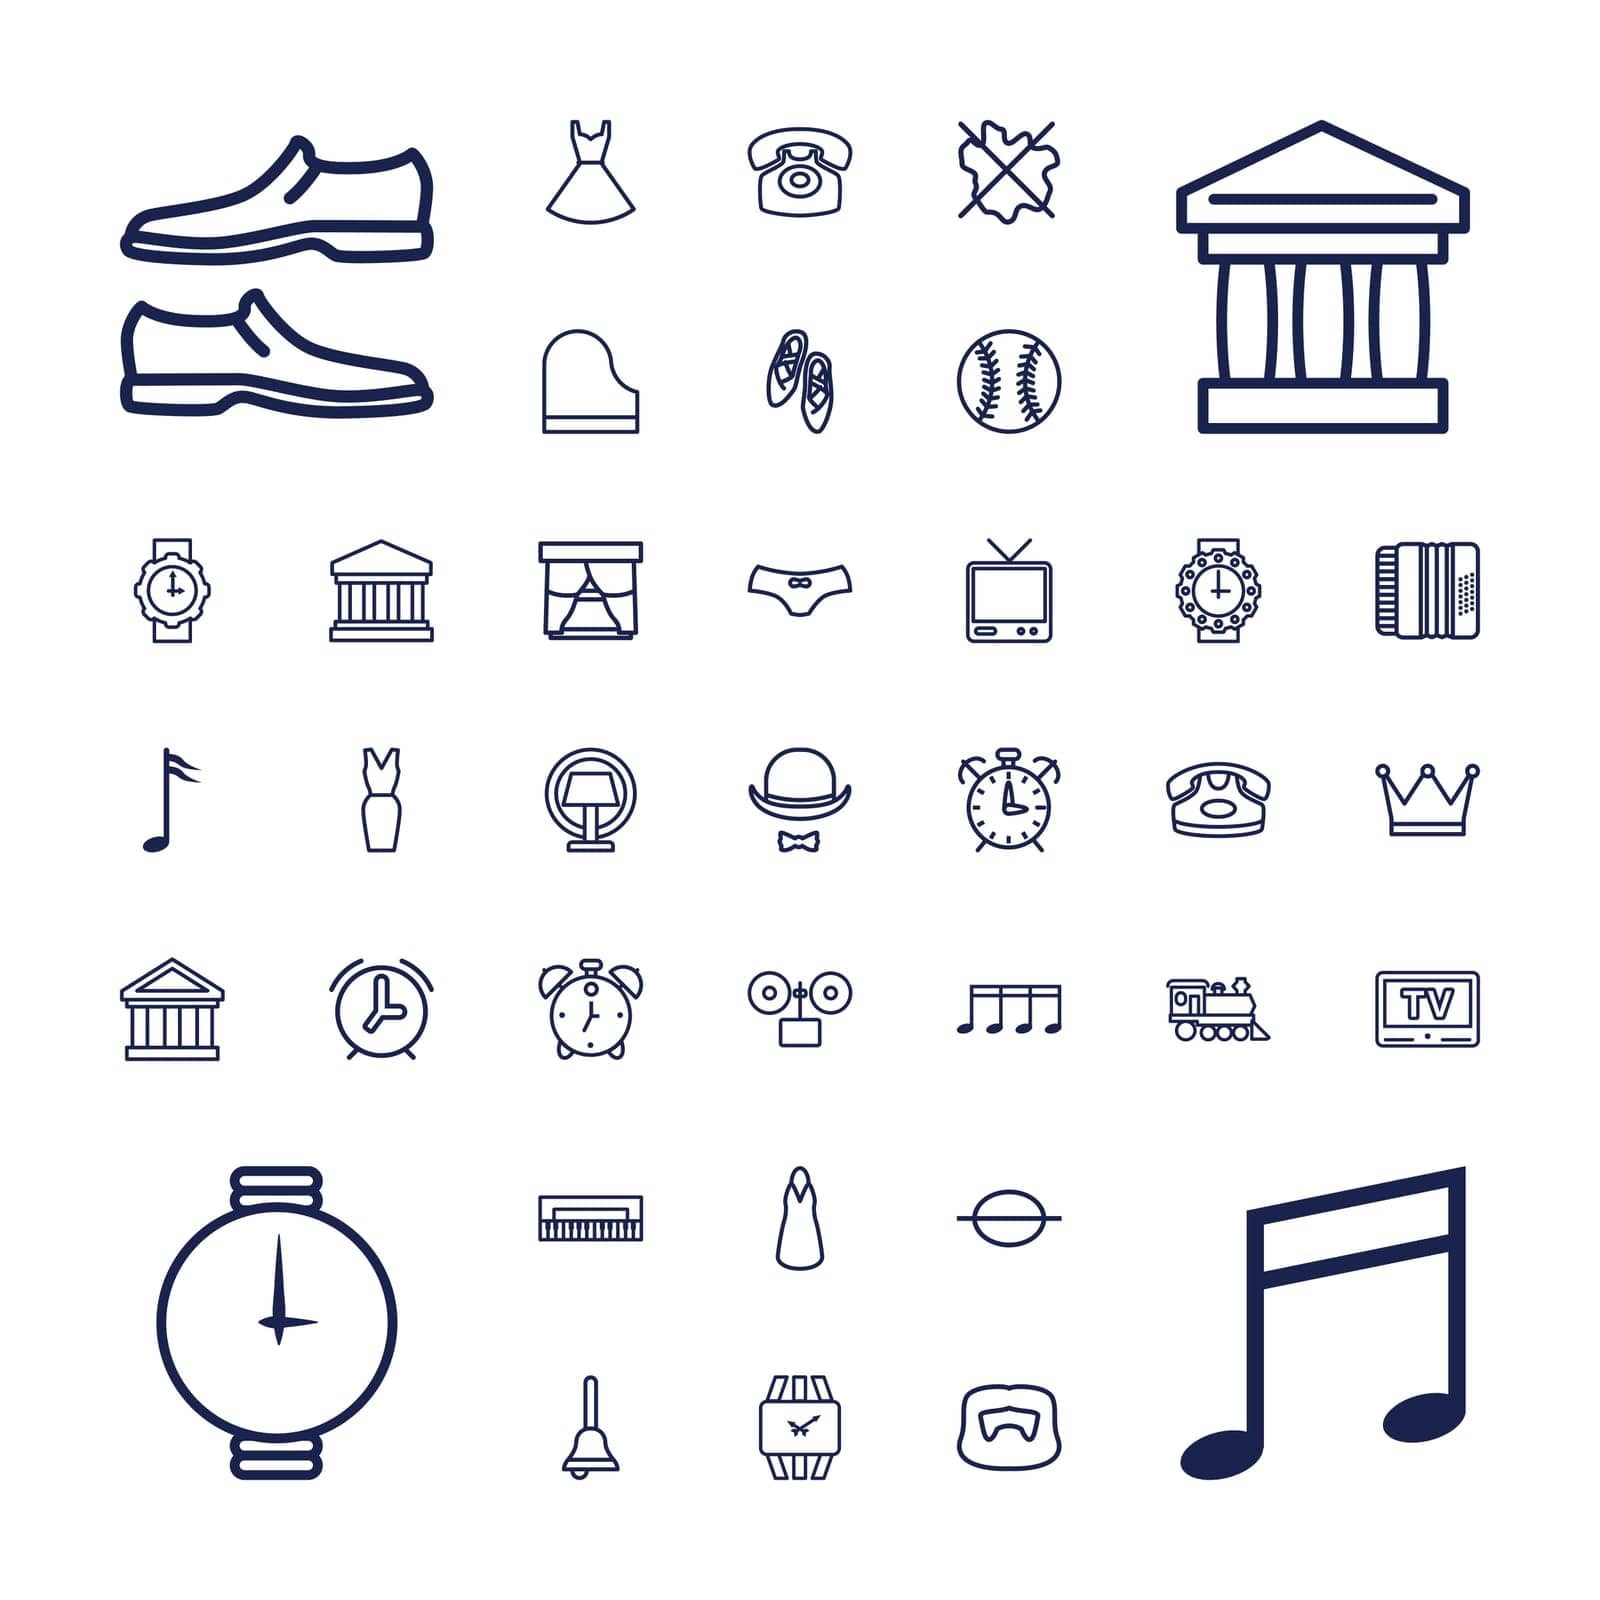 dress,symbol,no,note,tv,woman,icon,for,wrist,building,bank,piano,music,and,locomotive,alarm,underwear,hat,vector,man,female,table,shoe,harmonic,crown,moustache,set,wash,lamp,ballet,court,bell,shoes,hairstyle,classic,phone,watch,desk,baseball,illustration,window by ogqcorp